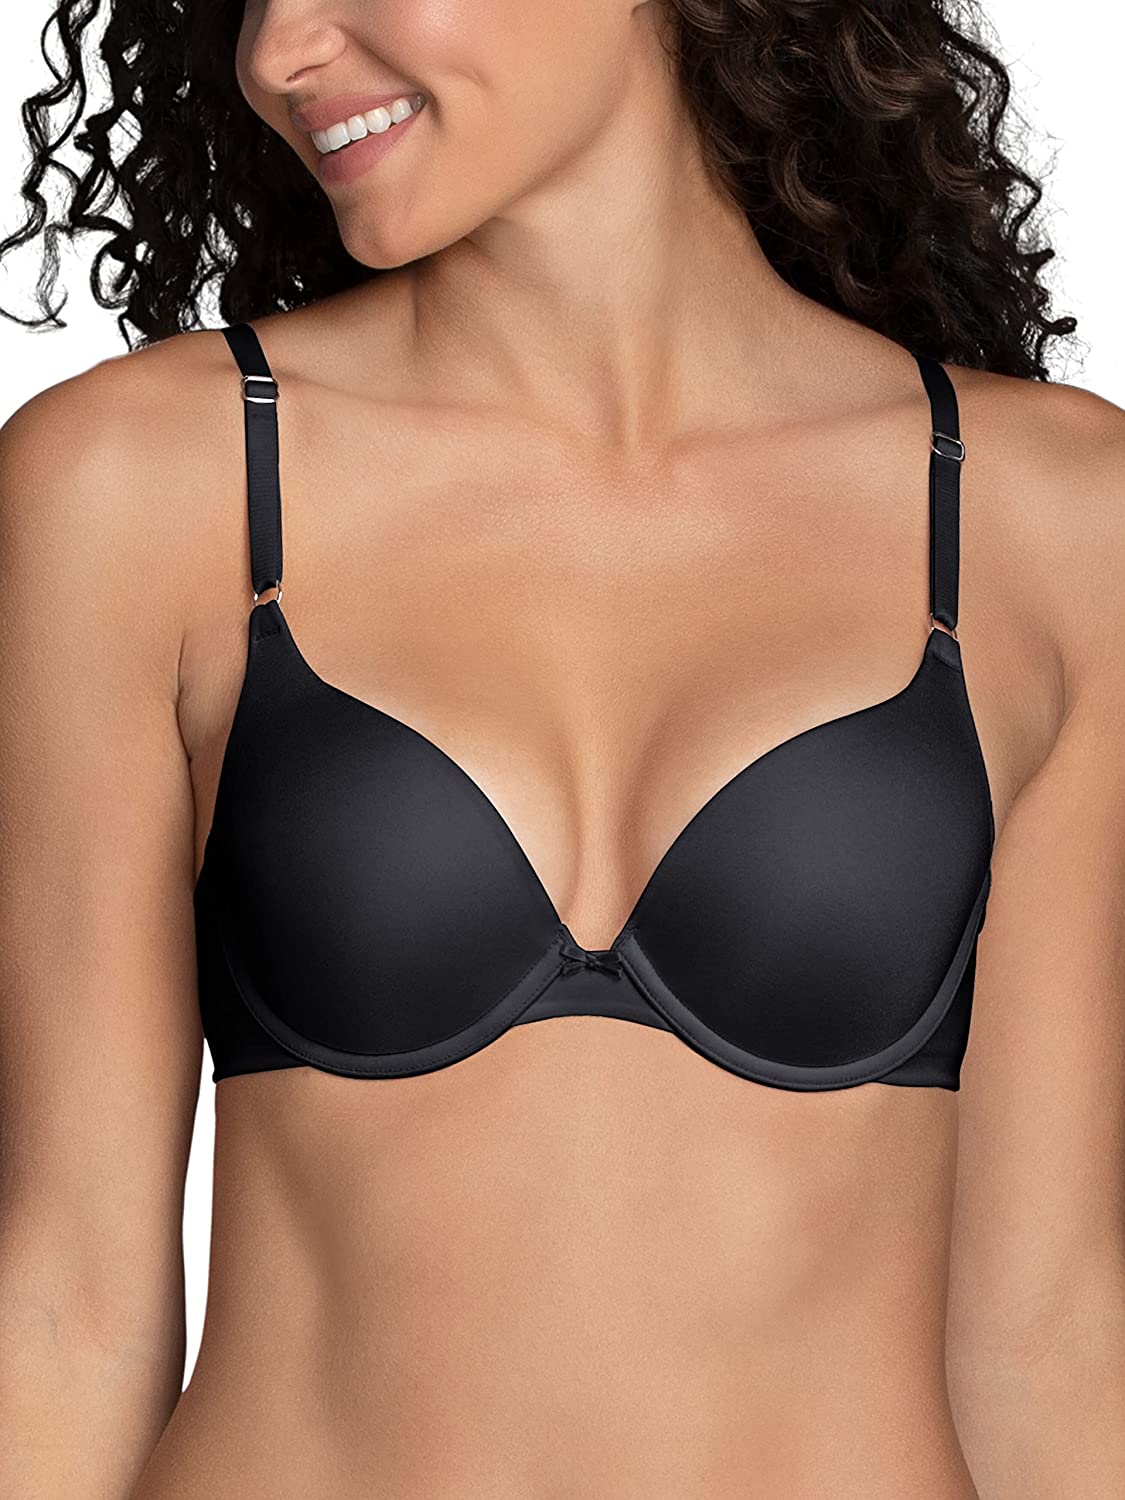 Vanity Fair Women's Ego Boost Add-A-Size Push Up Bra (+1 Cup Size)